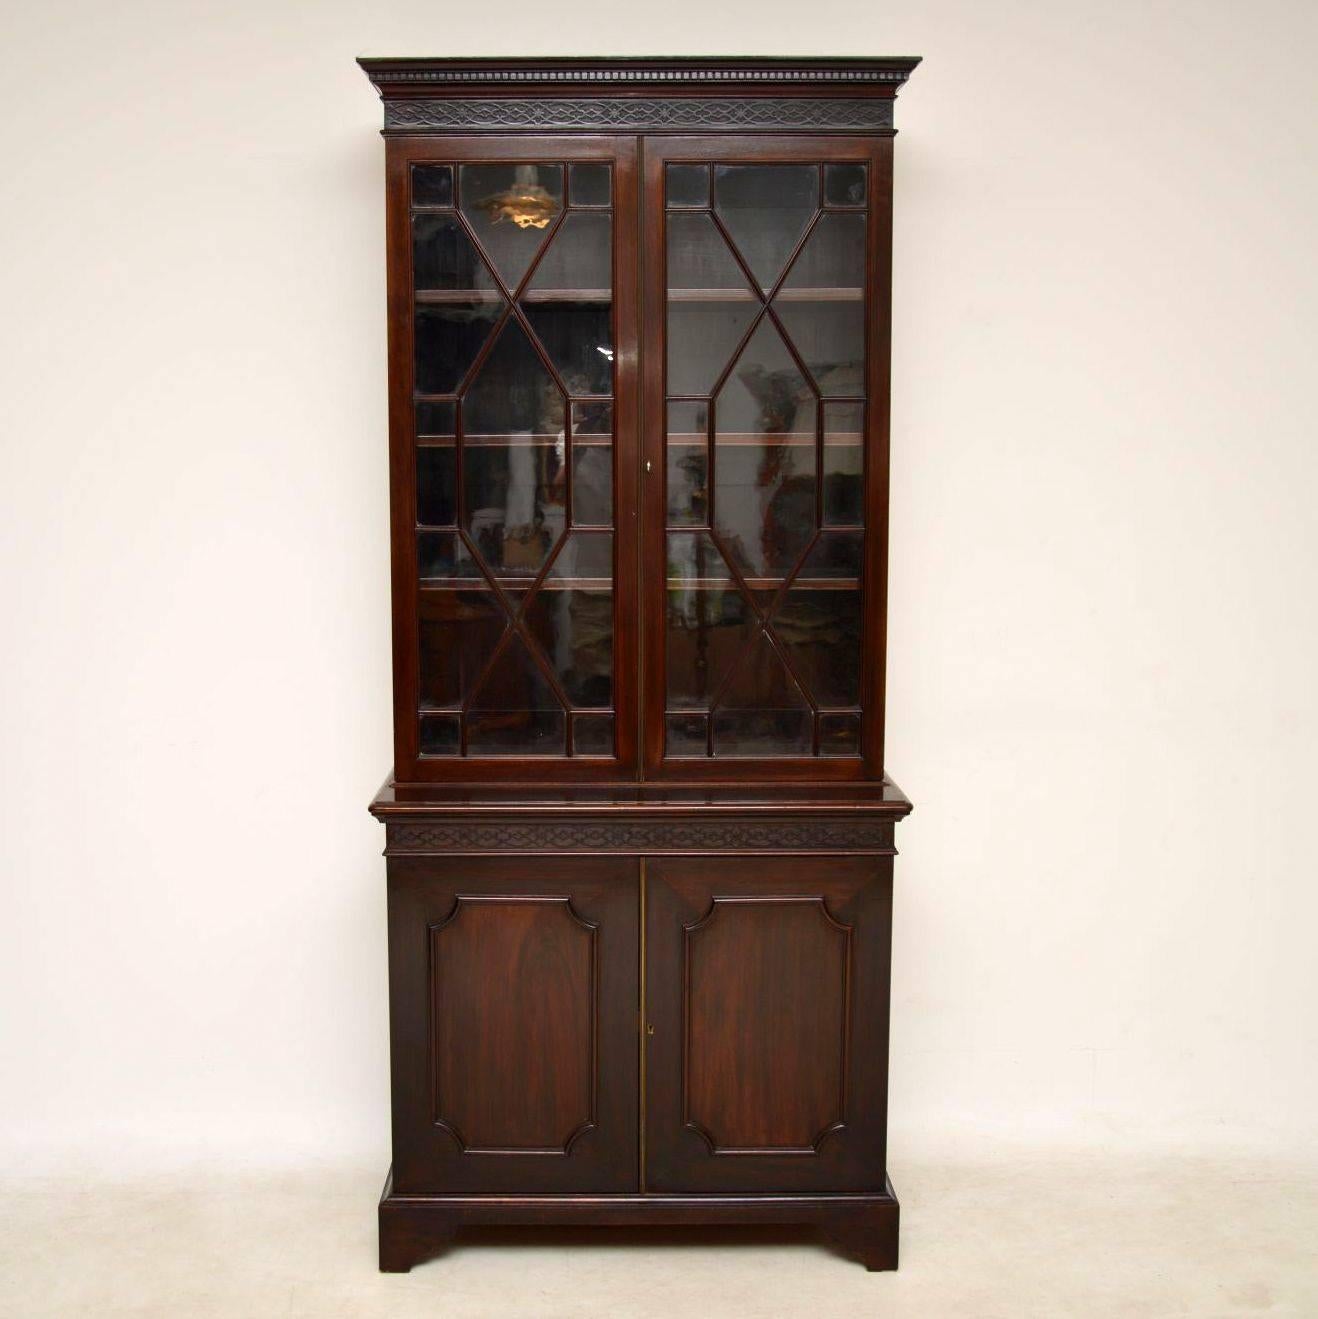 Antique mahogany library bookcase of exceptional quality and in great condition, dating from the 1890-1910 period. The top section has astral-glazed doors behind which are fully adjustable shelves that slot into side grooves. The bottom cupboard has